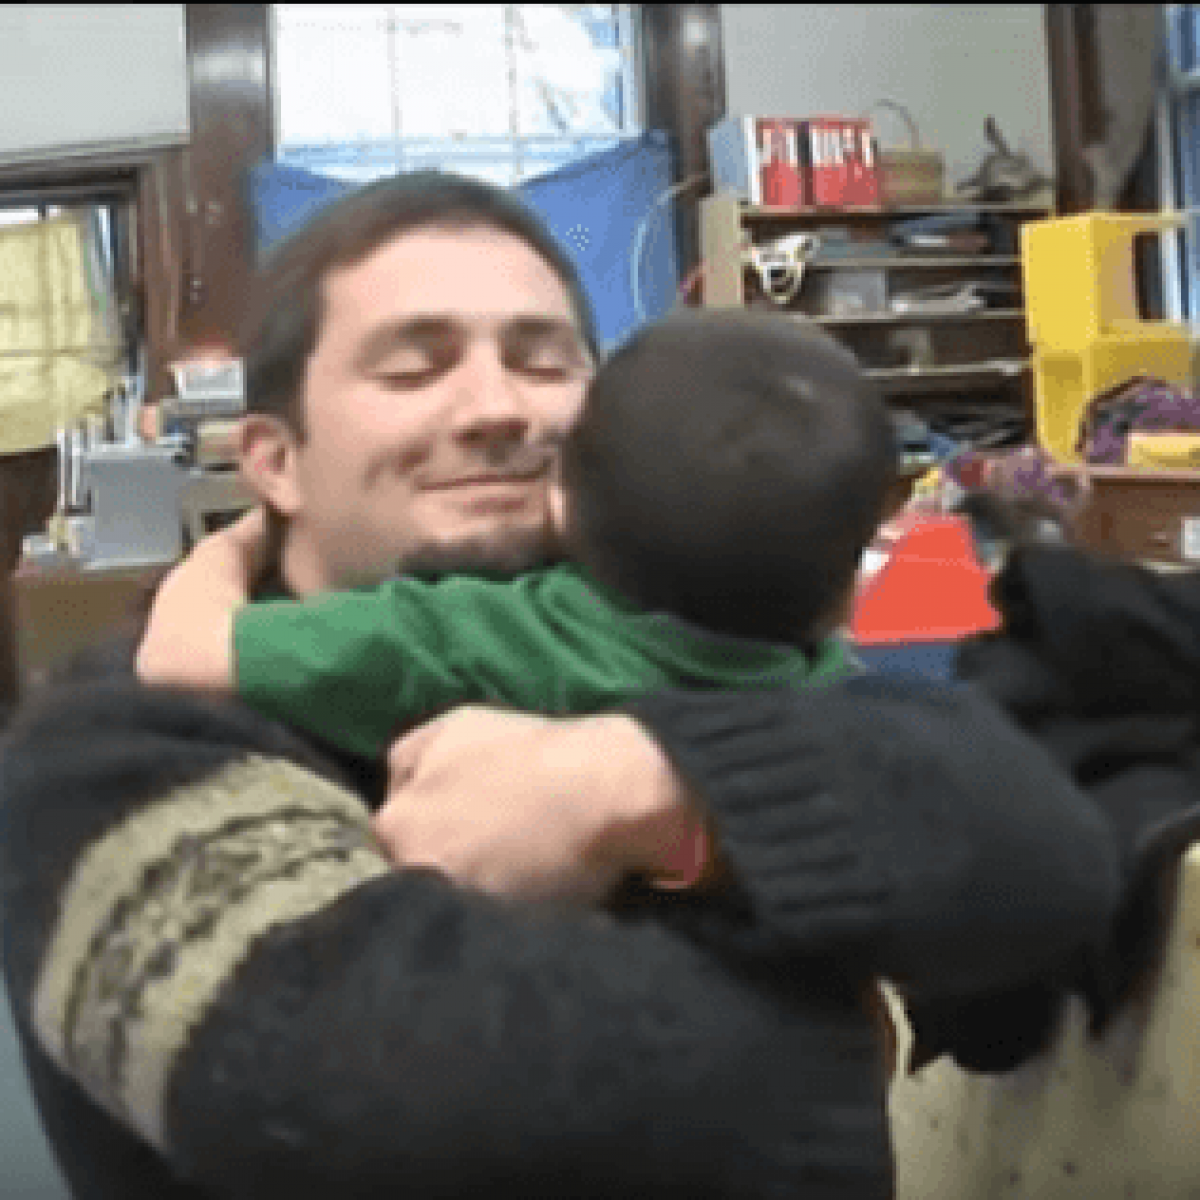 A screen capture from the Engaging Fathers video of a father embracing a child.